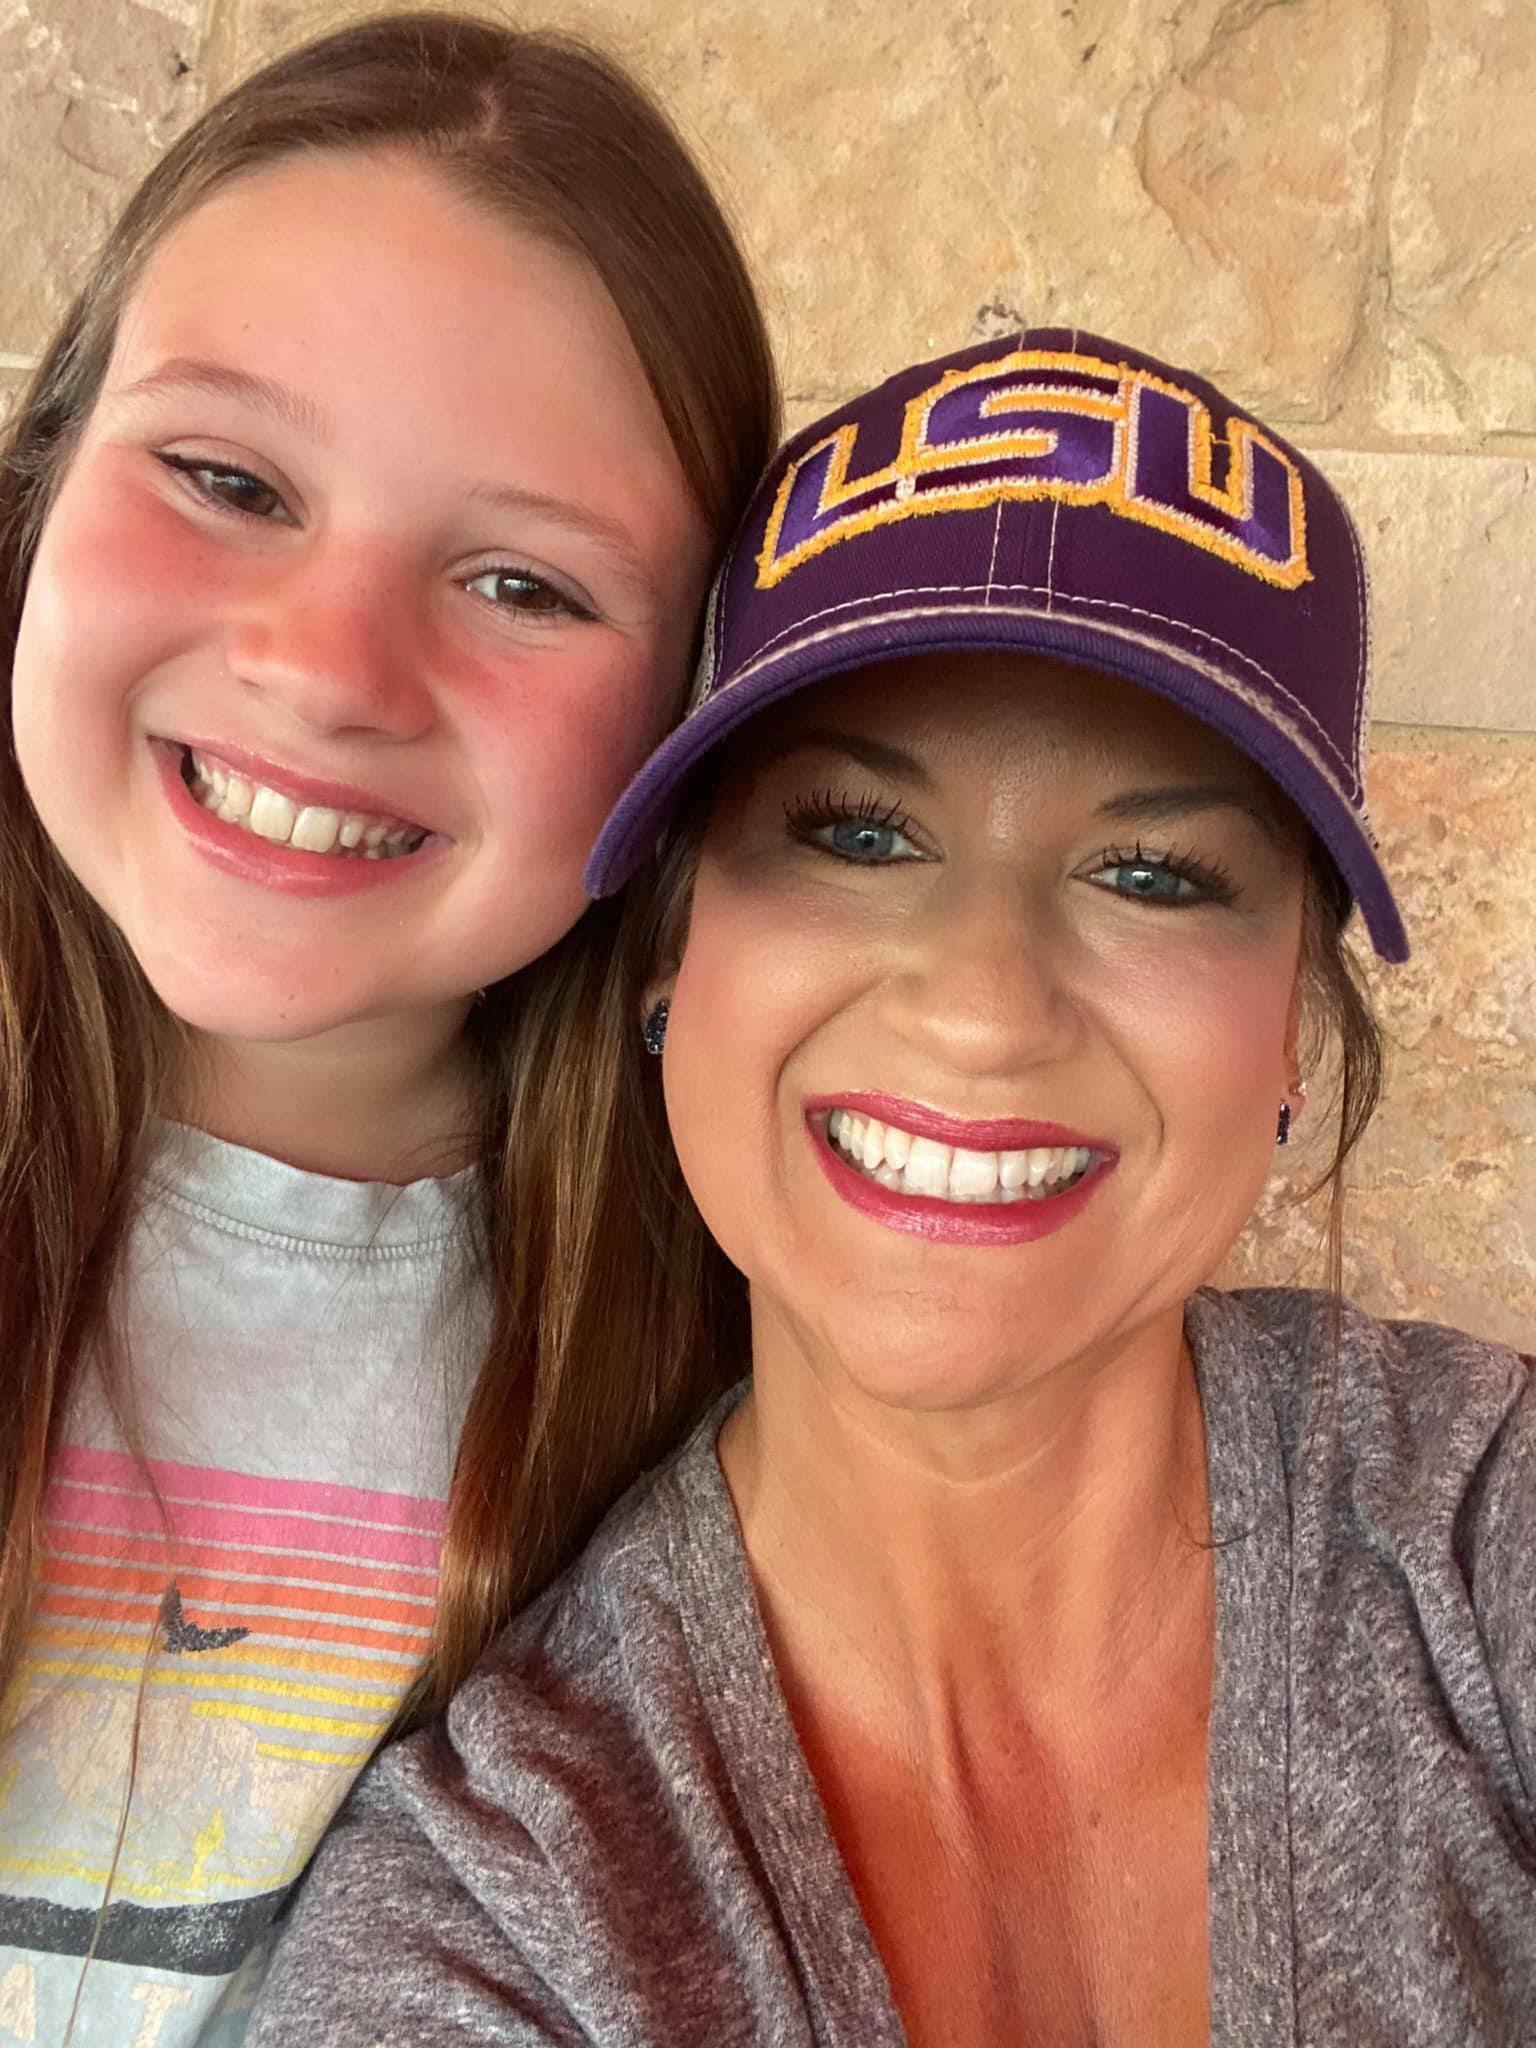 Always cheering for our LSU Tigers!!